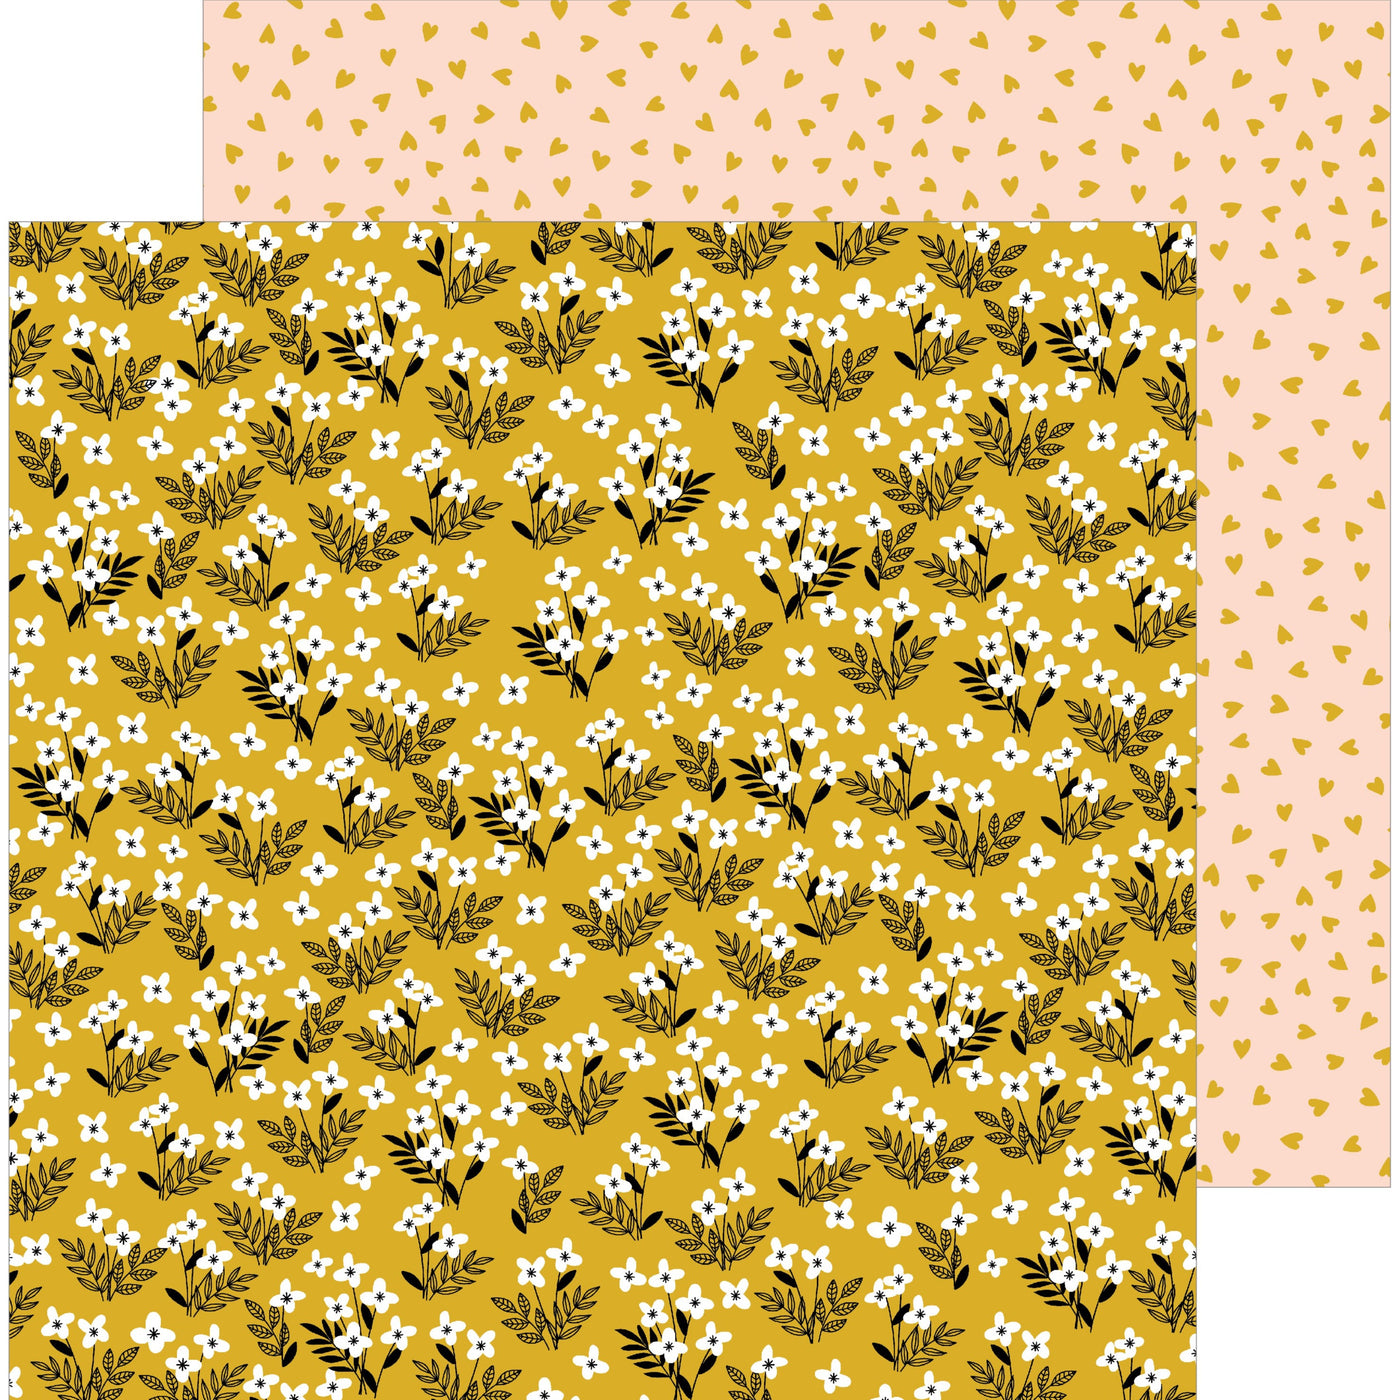 Multi-Colored (Side A - small white flowers with blue centers on black hand-drawn stems with leaves all on a mustard yellow background, Side B - tiny scattered mustard yellow hearts on a blush pink background)